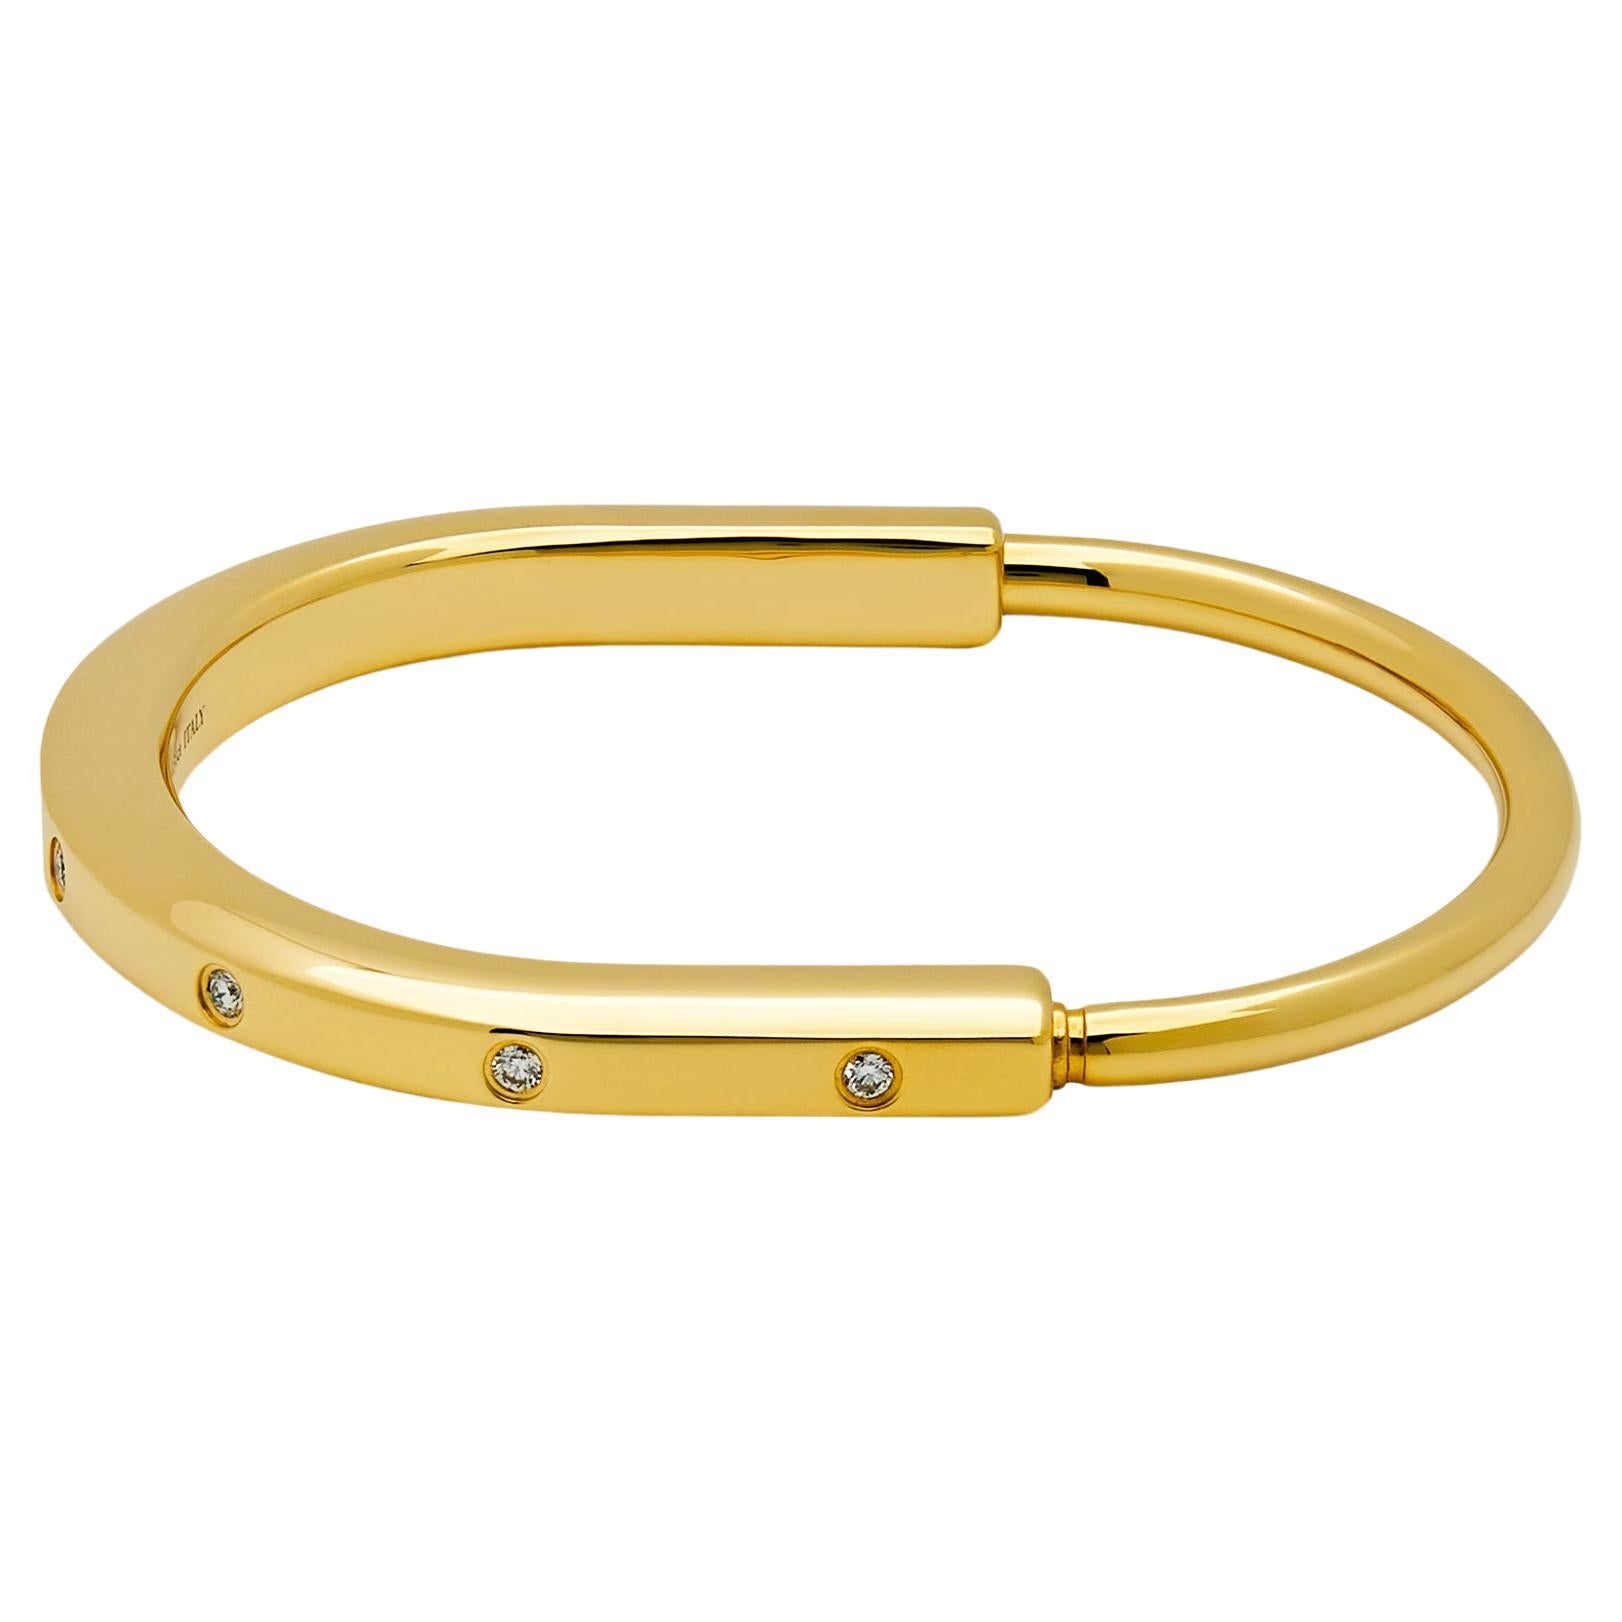 Tiffany & Co. Lock Bangle in Yellow Gold with Diamond Accents